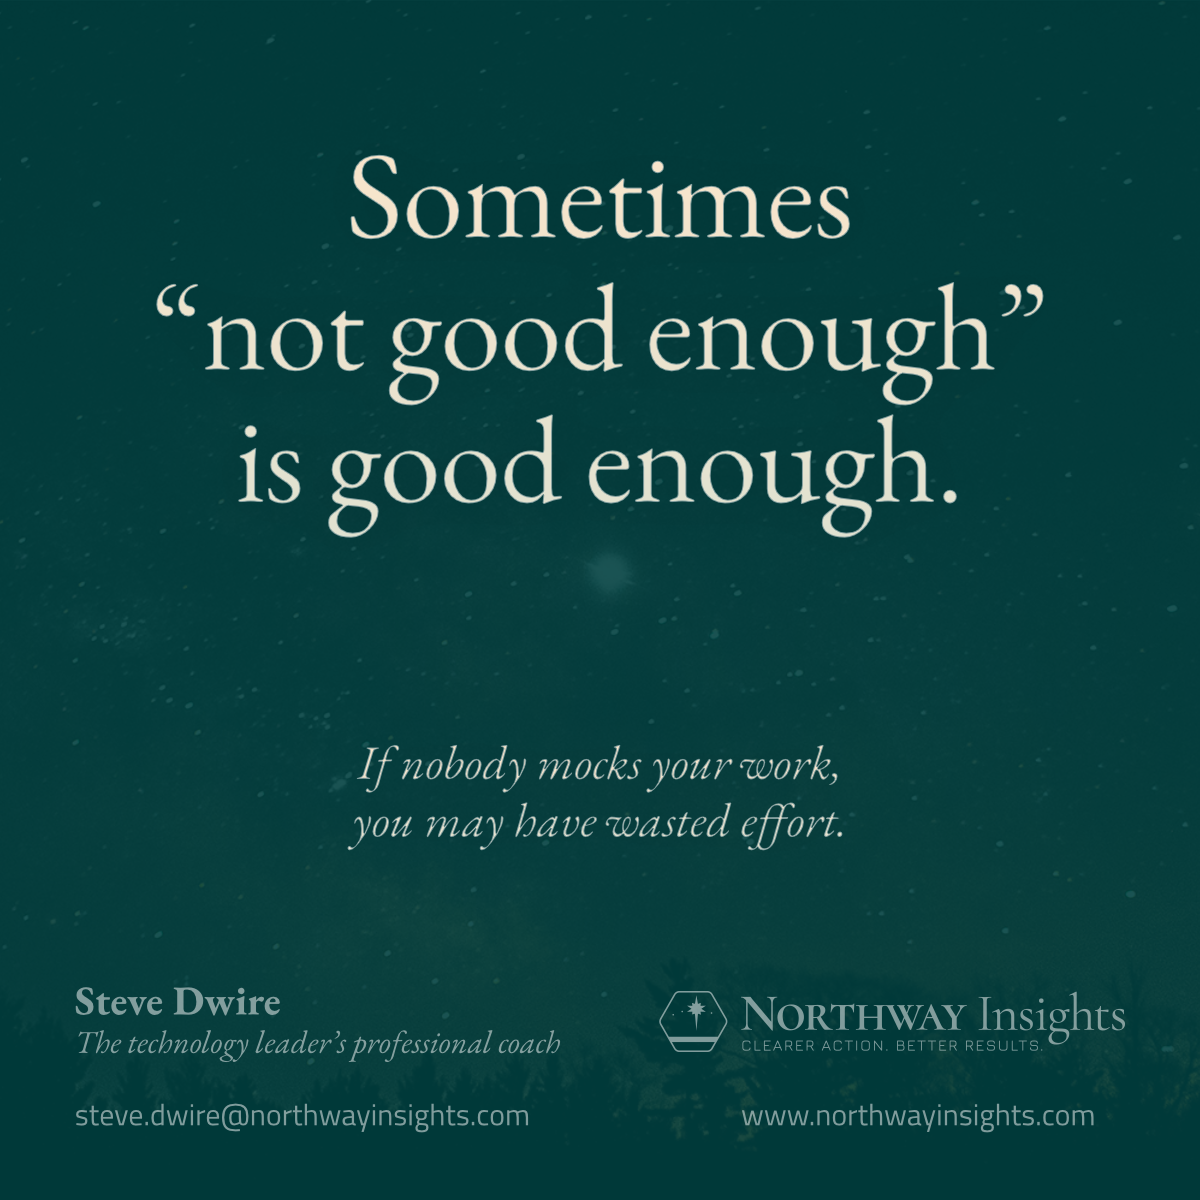 Sometimes "not good enough" is good enough. (If nobody mocks your work, you may have wasted effort.)